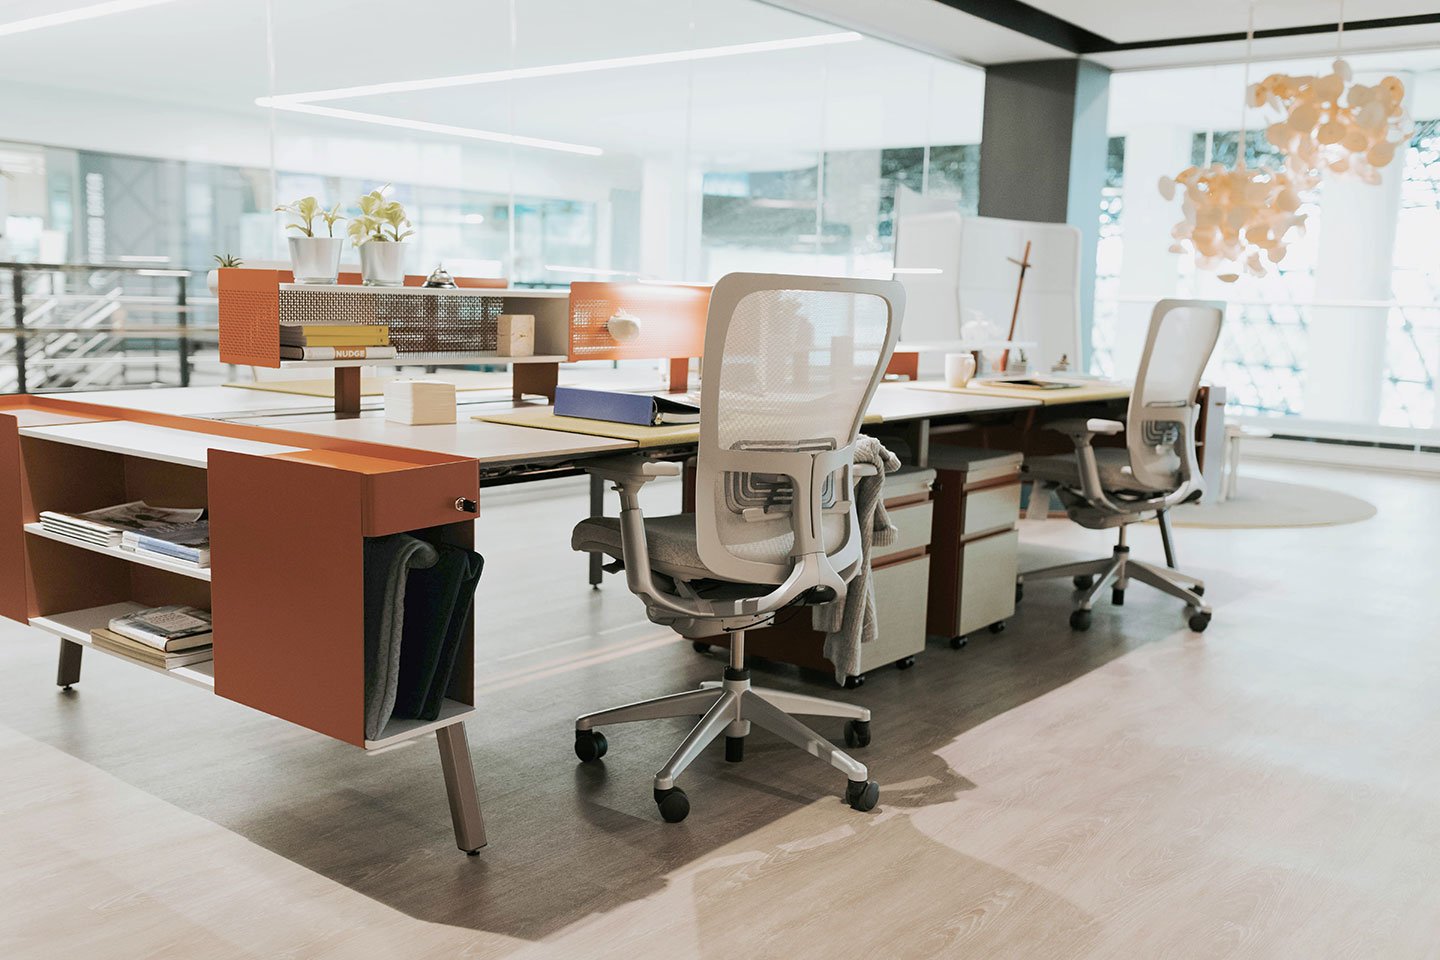 Haworth Intuity Workspace divider in open office seating with desks and storage compartments for files